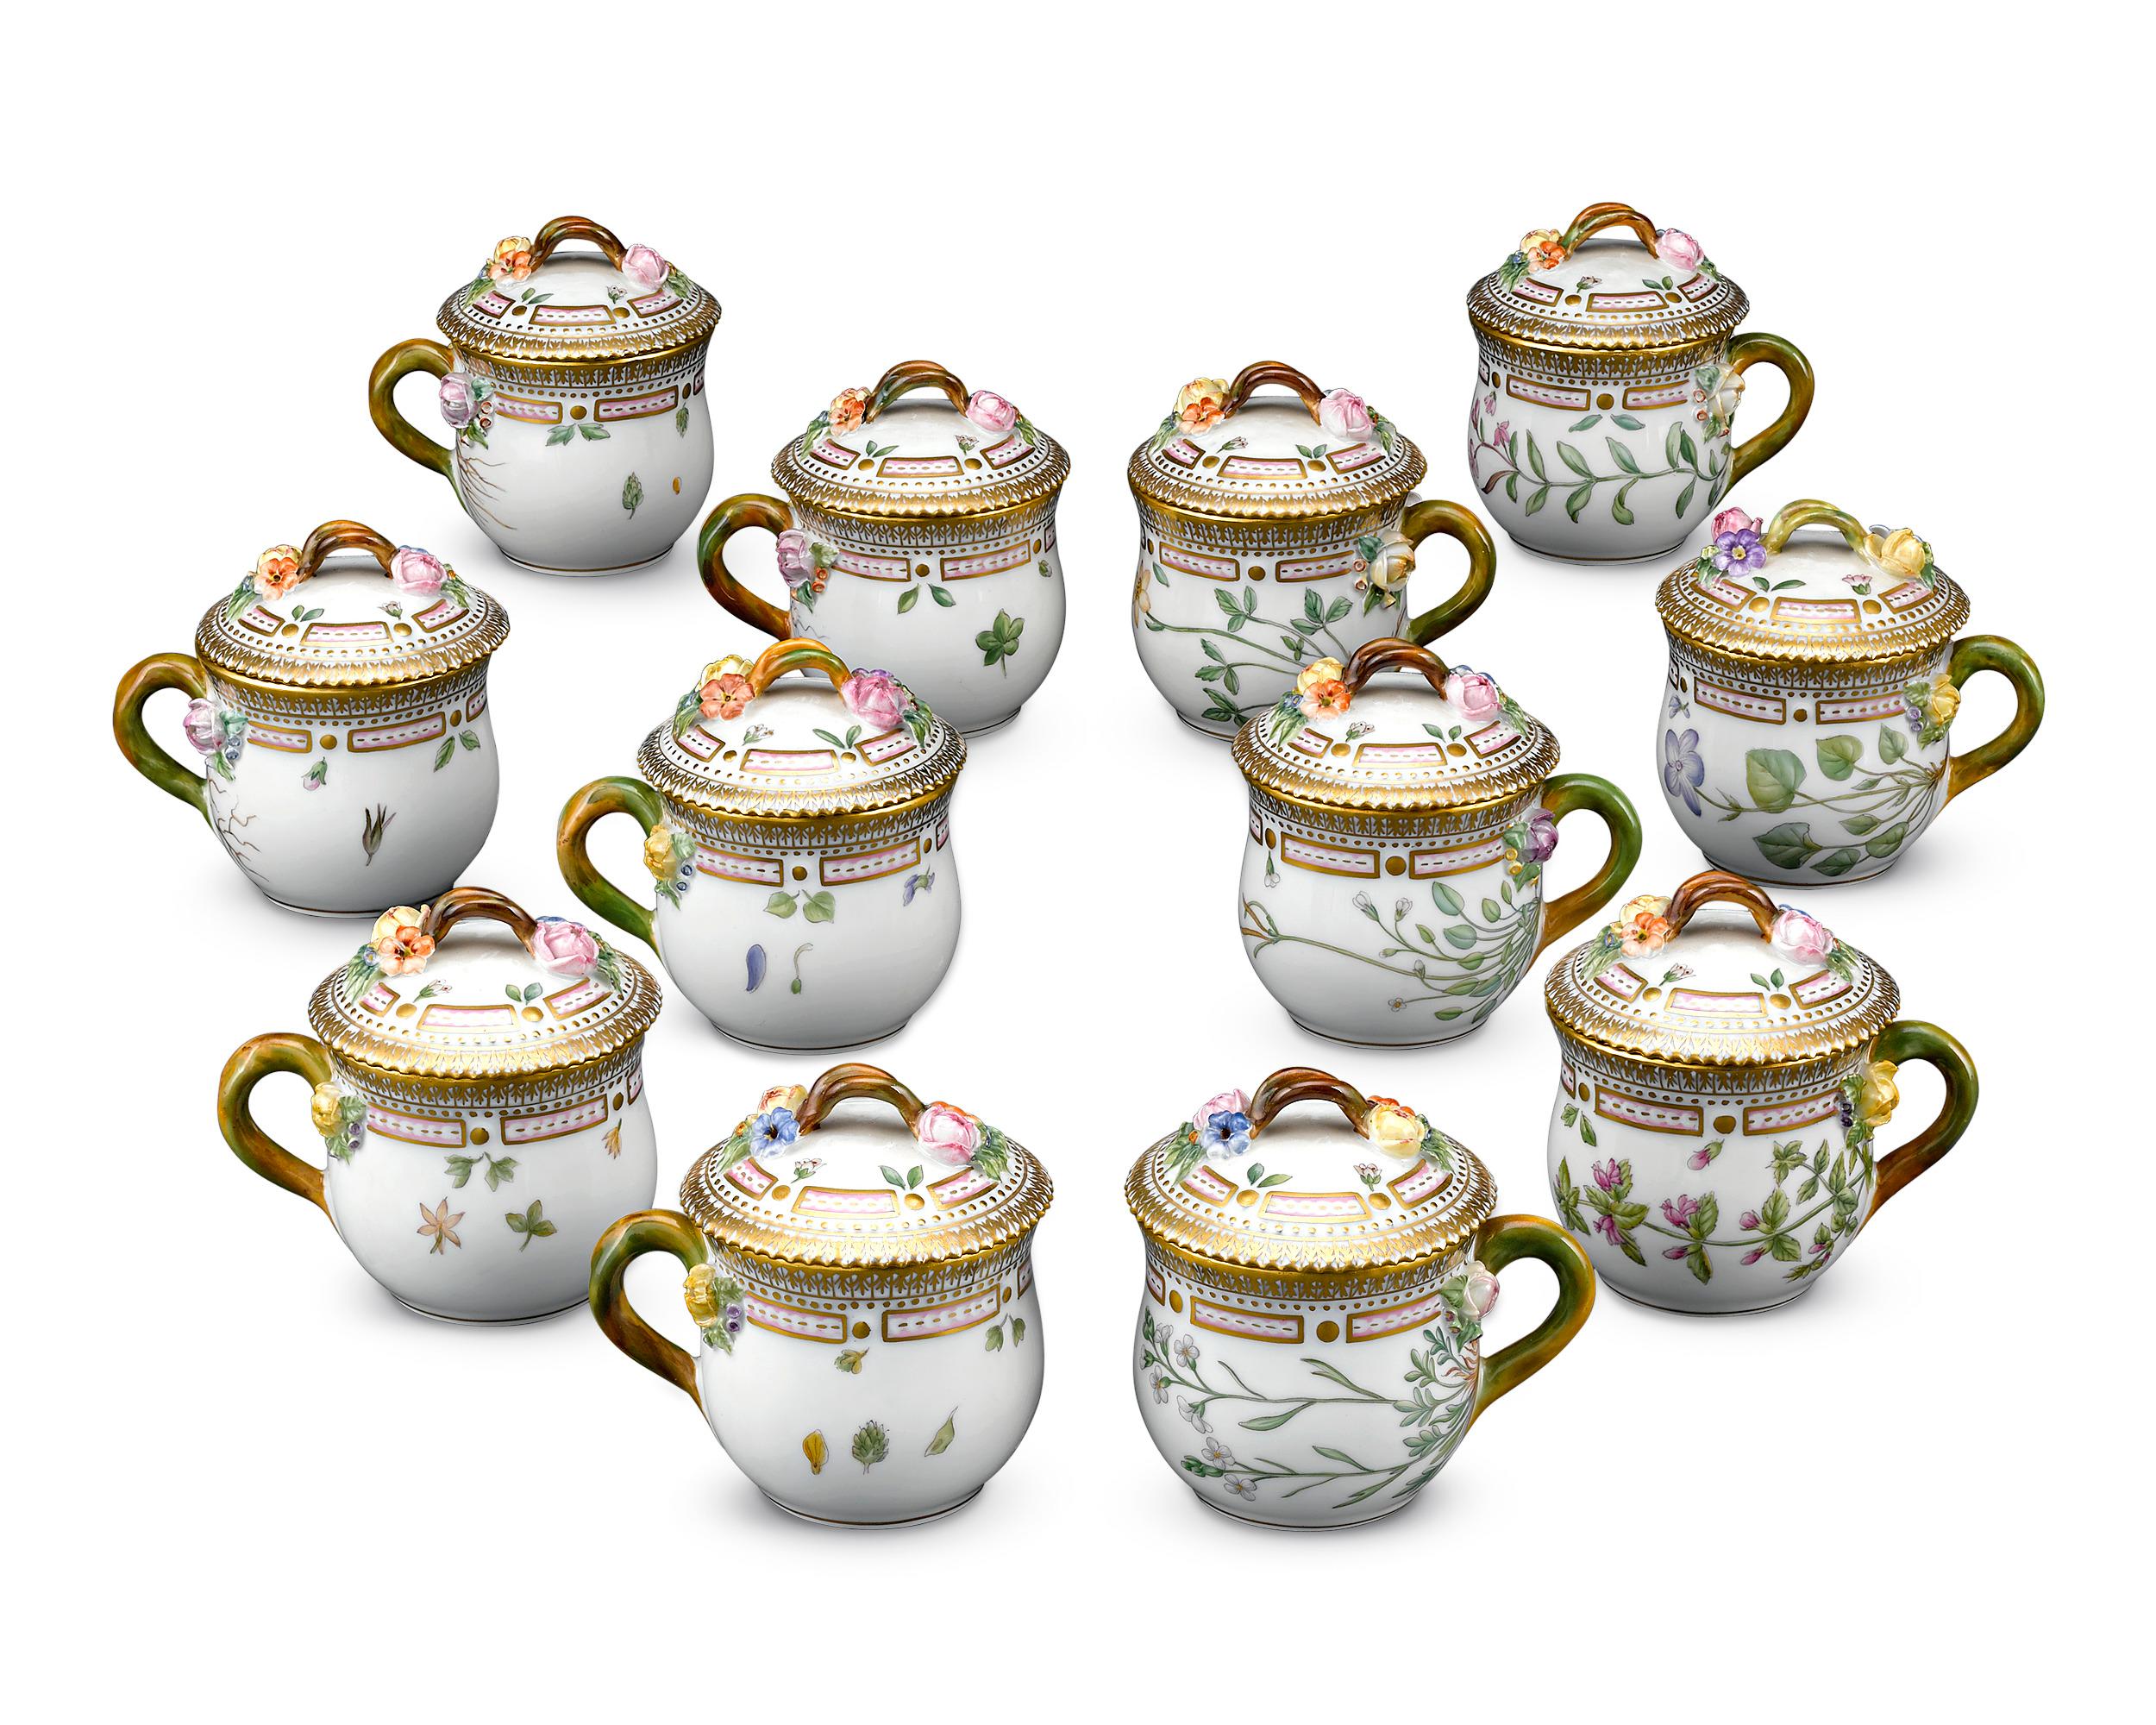 This extraordinary porcelain covered cups are the work of the legendary Royal Copenhagen. Crafted in the beloved Flora Danica pattern, one of the most prestigious porcelain patterns ever created, this stunning set of twelve incorporates the motif’s